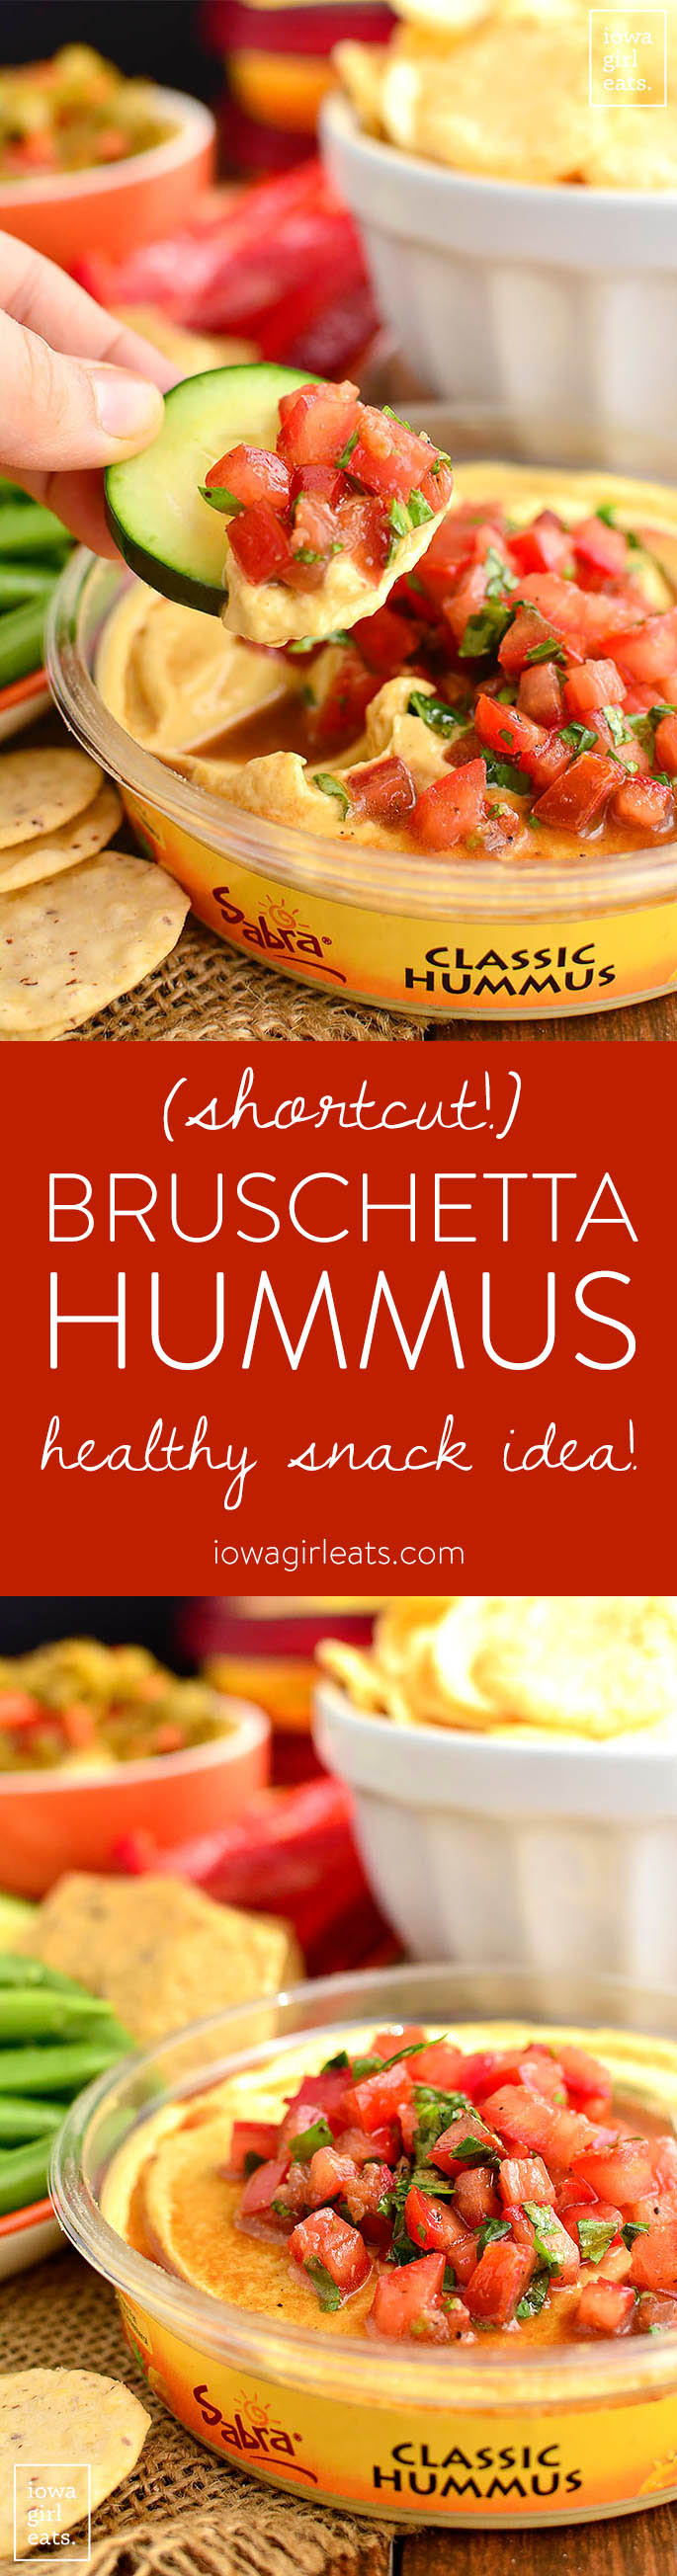 Shortcut Bruschetta Hummus is a quick and easy way to jazz up store-bought hummus. This fresh and healthy snack is absolutely delicious! | iowagirleats.com